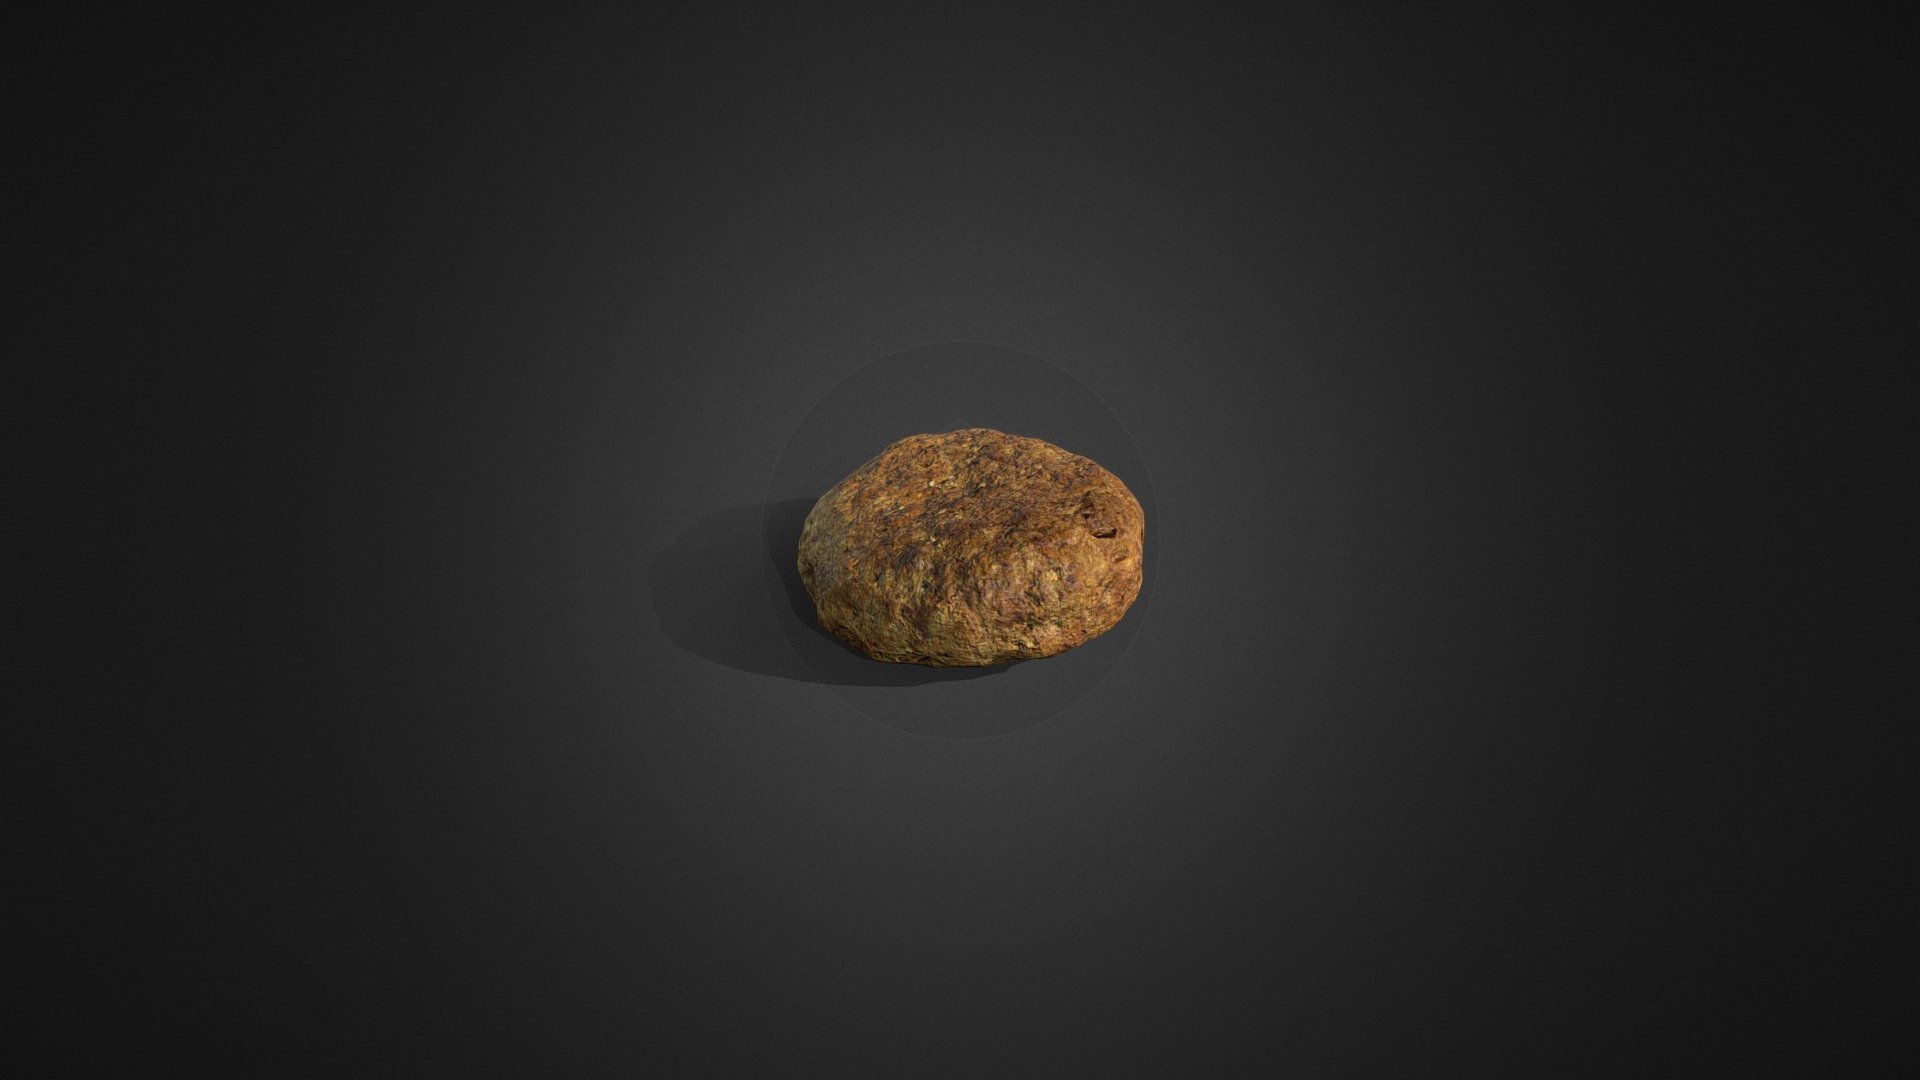 This dogfood pellet was scanned using photogrammetry with a Sony A7RV through a total of 71 images. The images had 61MP and were processed in Reality Capture. Provided by me are PBR textures:




Diffuse: 8k

Specular 8k

Normal: 8k

Gloss: 8k

AO: 8k

and Highpoly + Lowpoly retopoligized models. In the preview above you can only see the lowpoly model with normals created from the highpoly model. All models are in separated files and game ready. For any questions or problems, please do not hesitate to contact me.

If you buy this asset you will find all important files under “Additional Files”.

Feedback in form of a comment or by pressing the star is very welcome.

Lowpoly -&gt; 1.608 Polygons

Highpoly -&gt; 6.58M Polygons - Dogfood Pellet - Buy Royalty Free 3D model by Gewoelbe3DScan (@3dgewoelbescan) 3d model